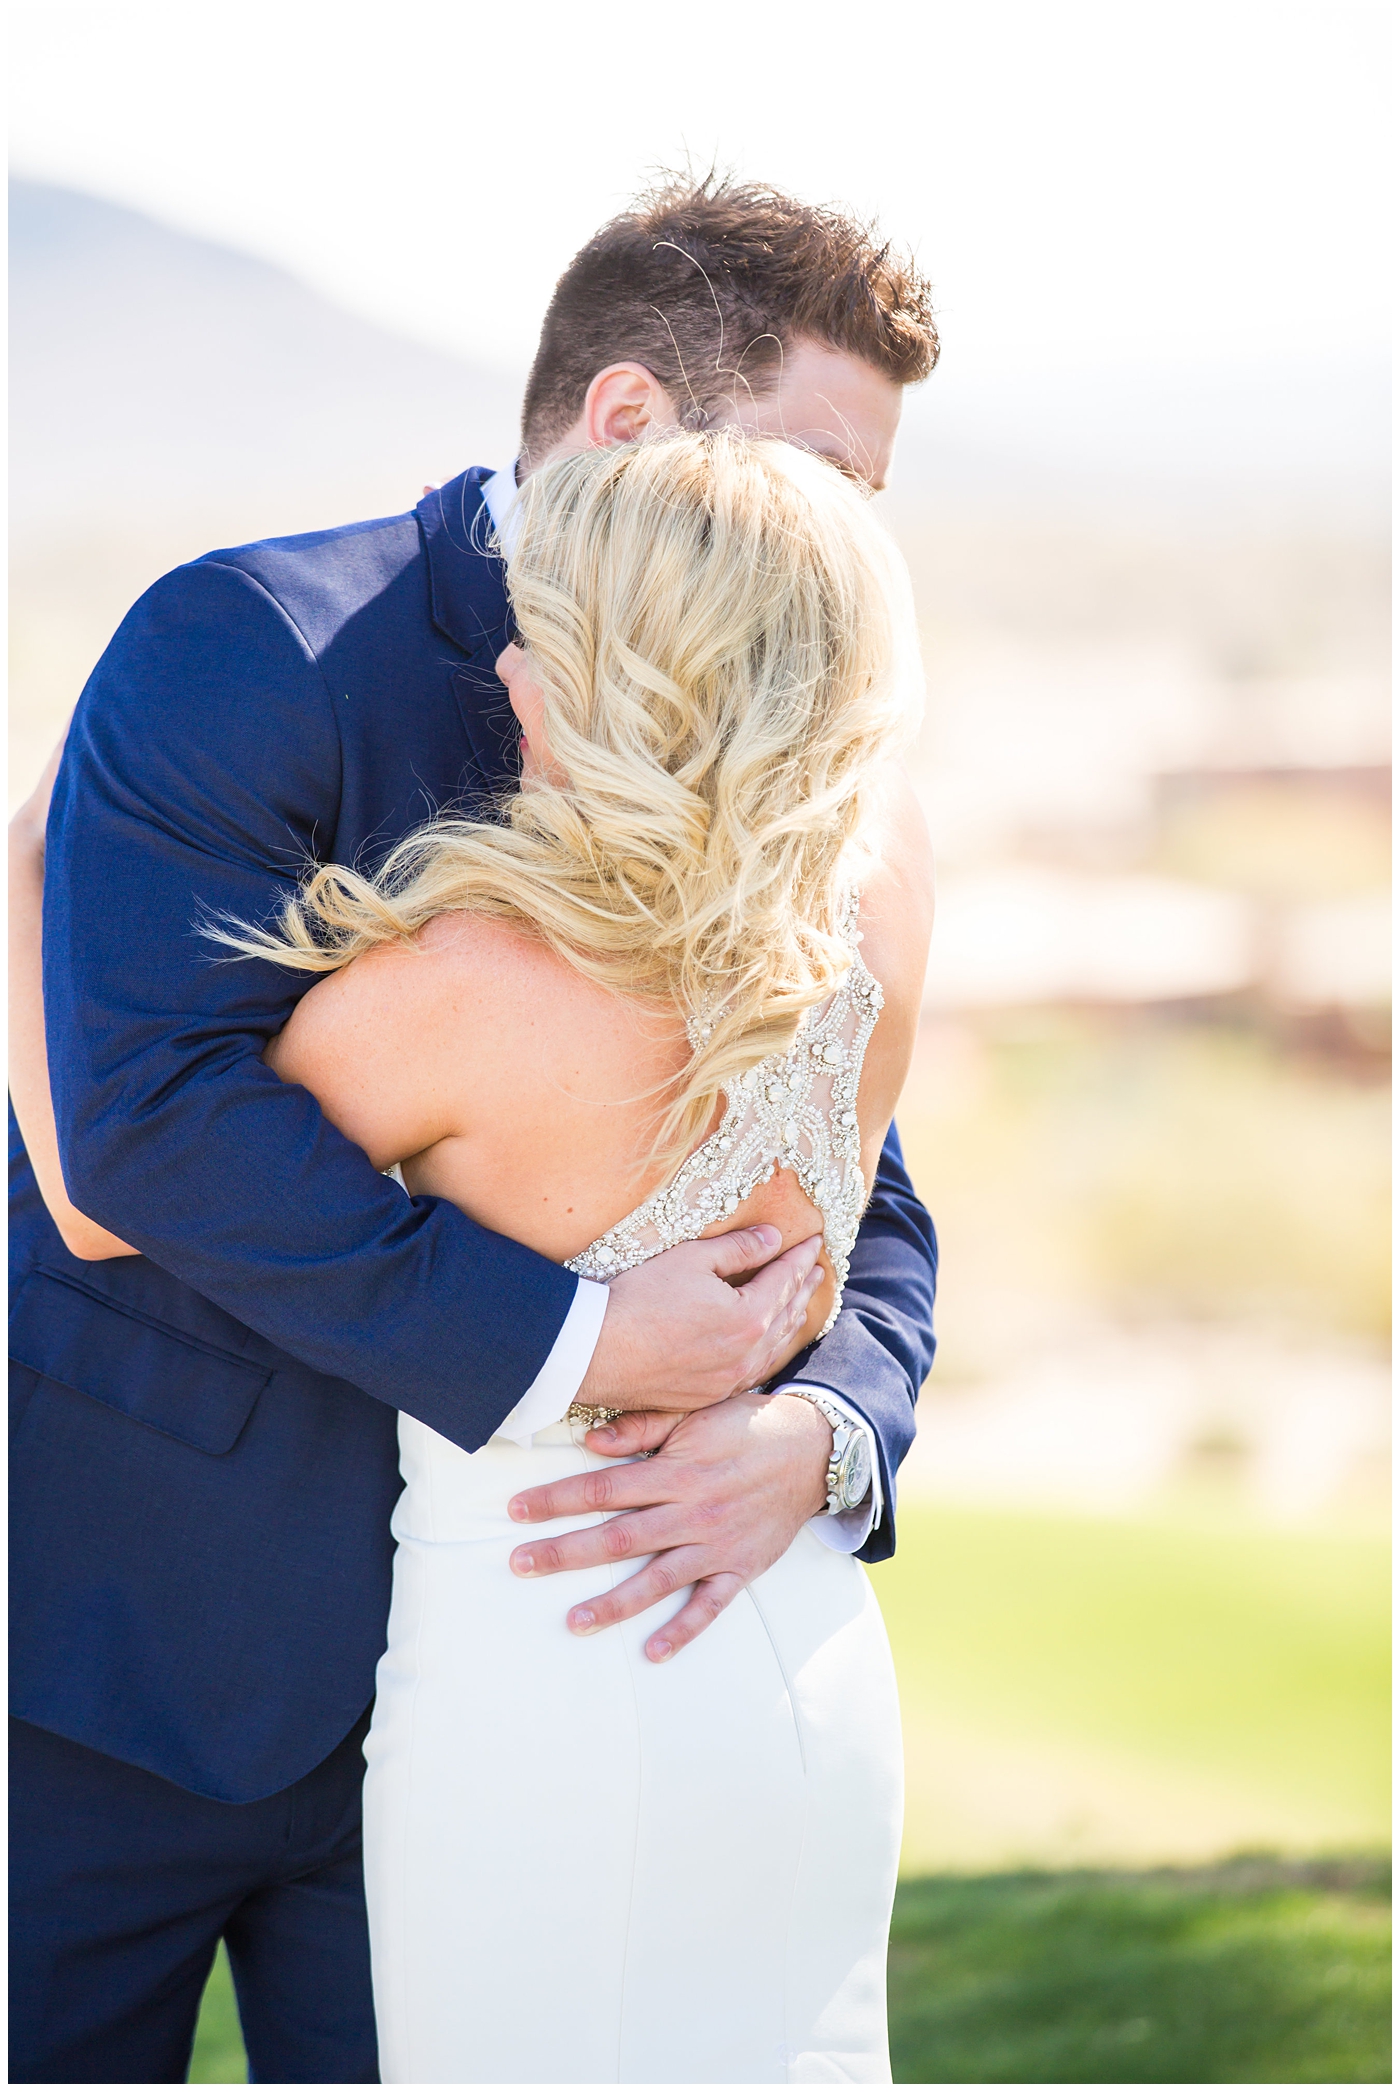 gorgeous bride with side swept hair in racerback pronovias dress with groom in navy suit and tie first look on wedding day